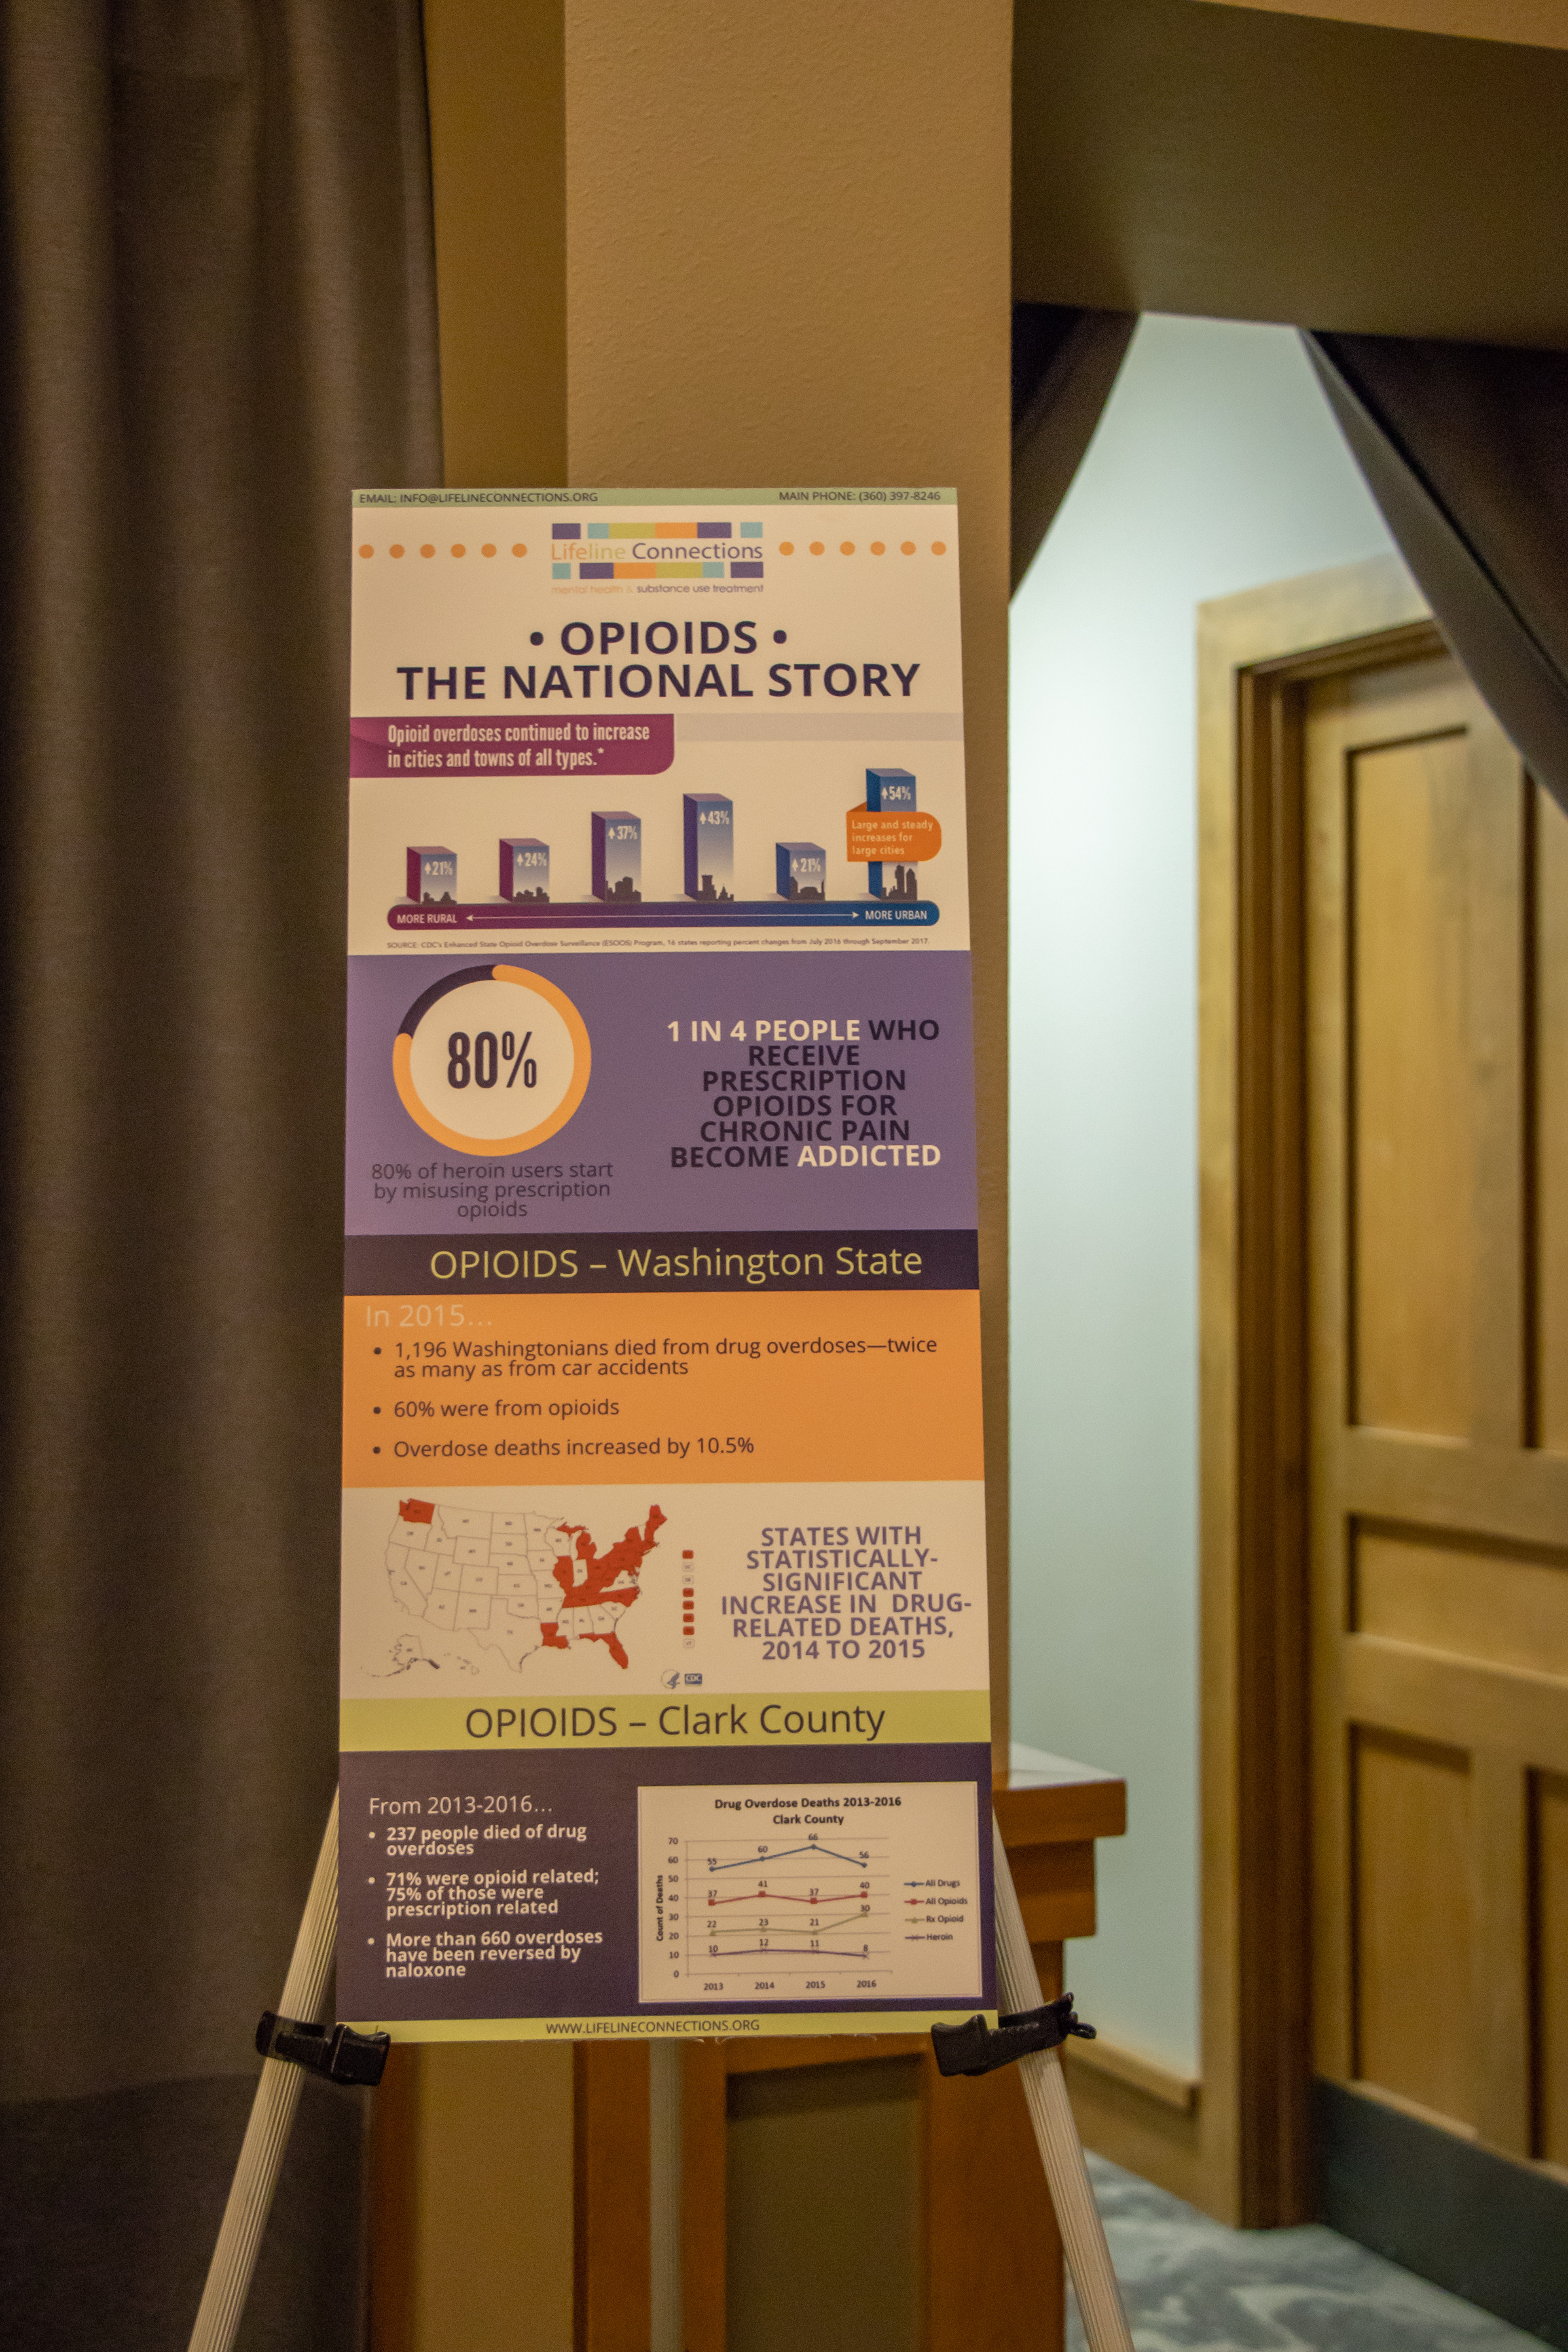 Opioids The National Story banner at Lifeline Connections event